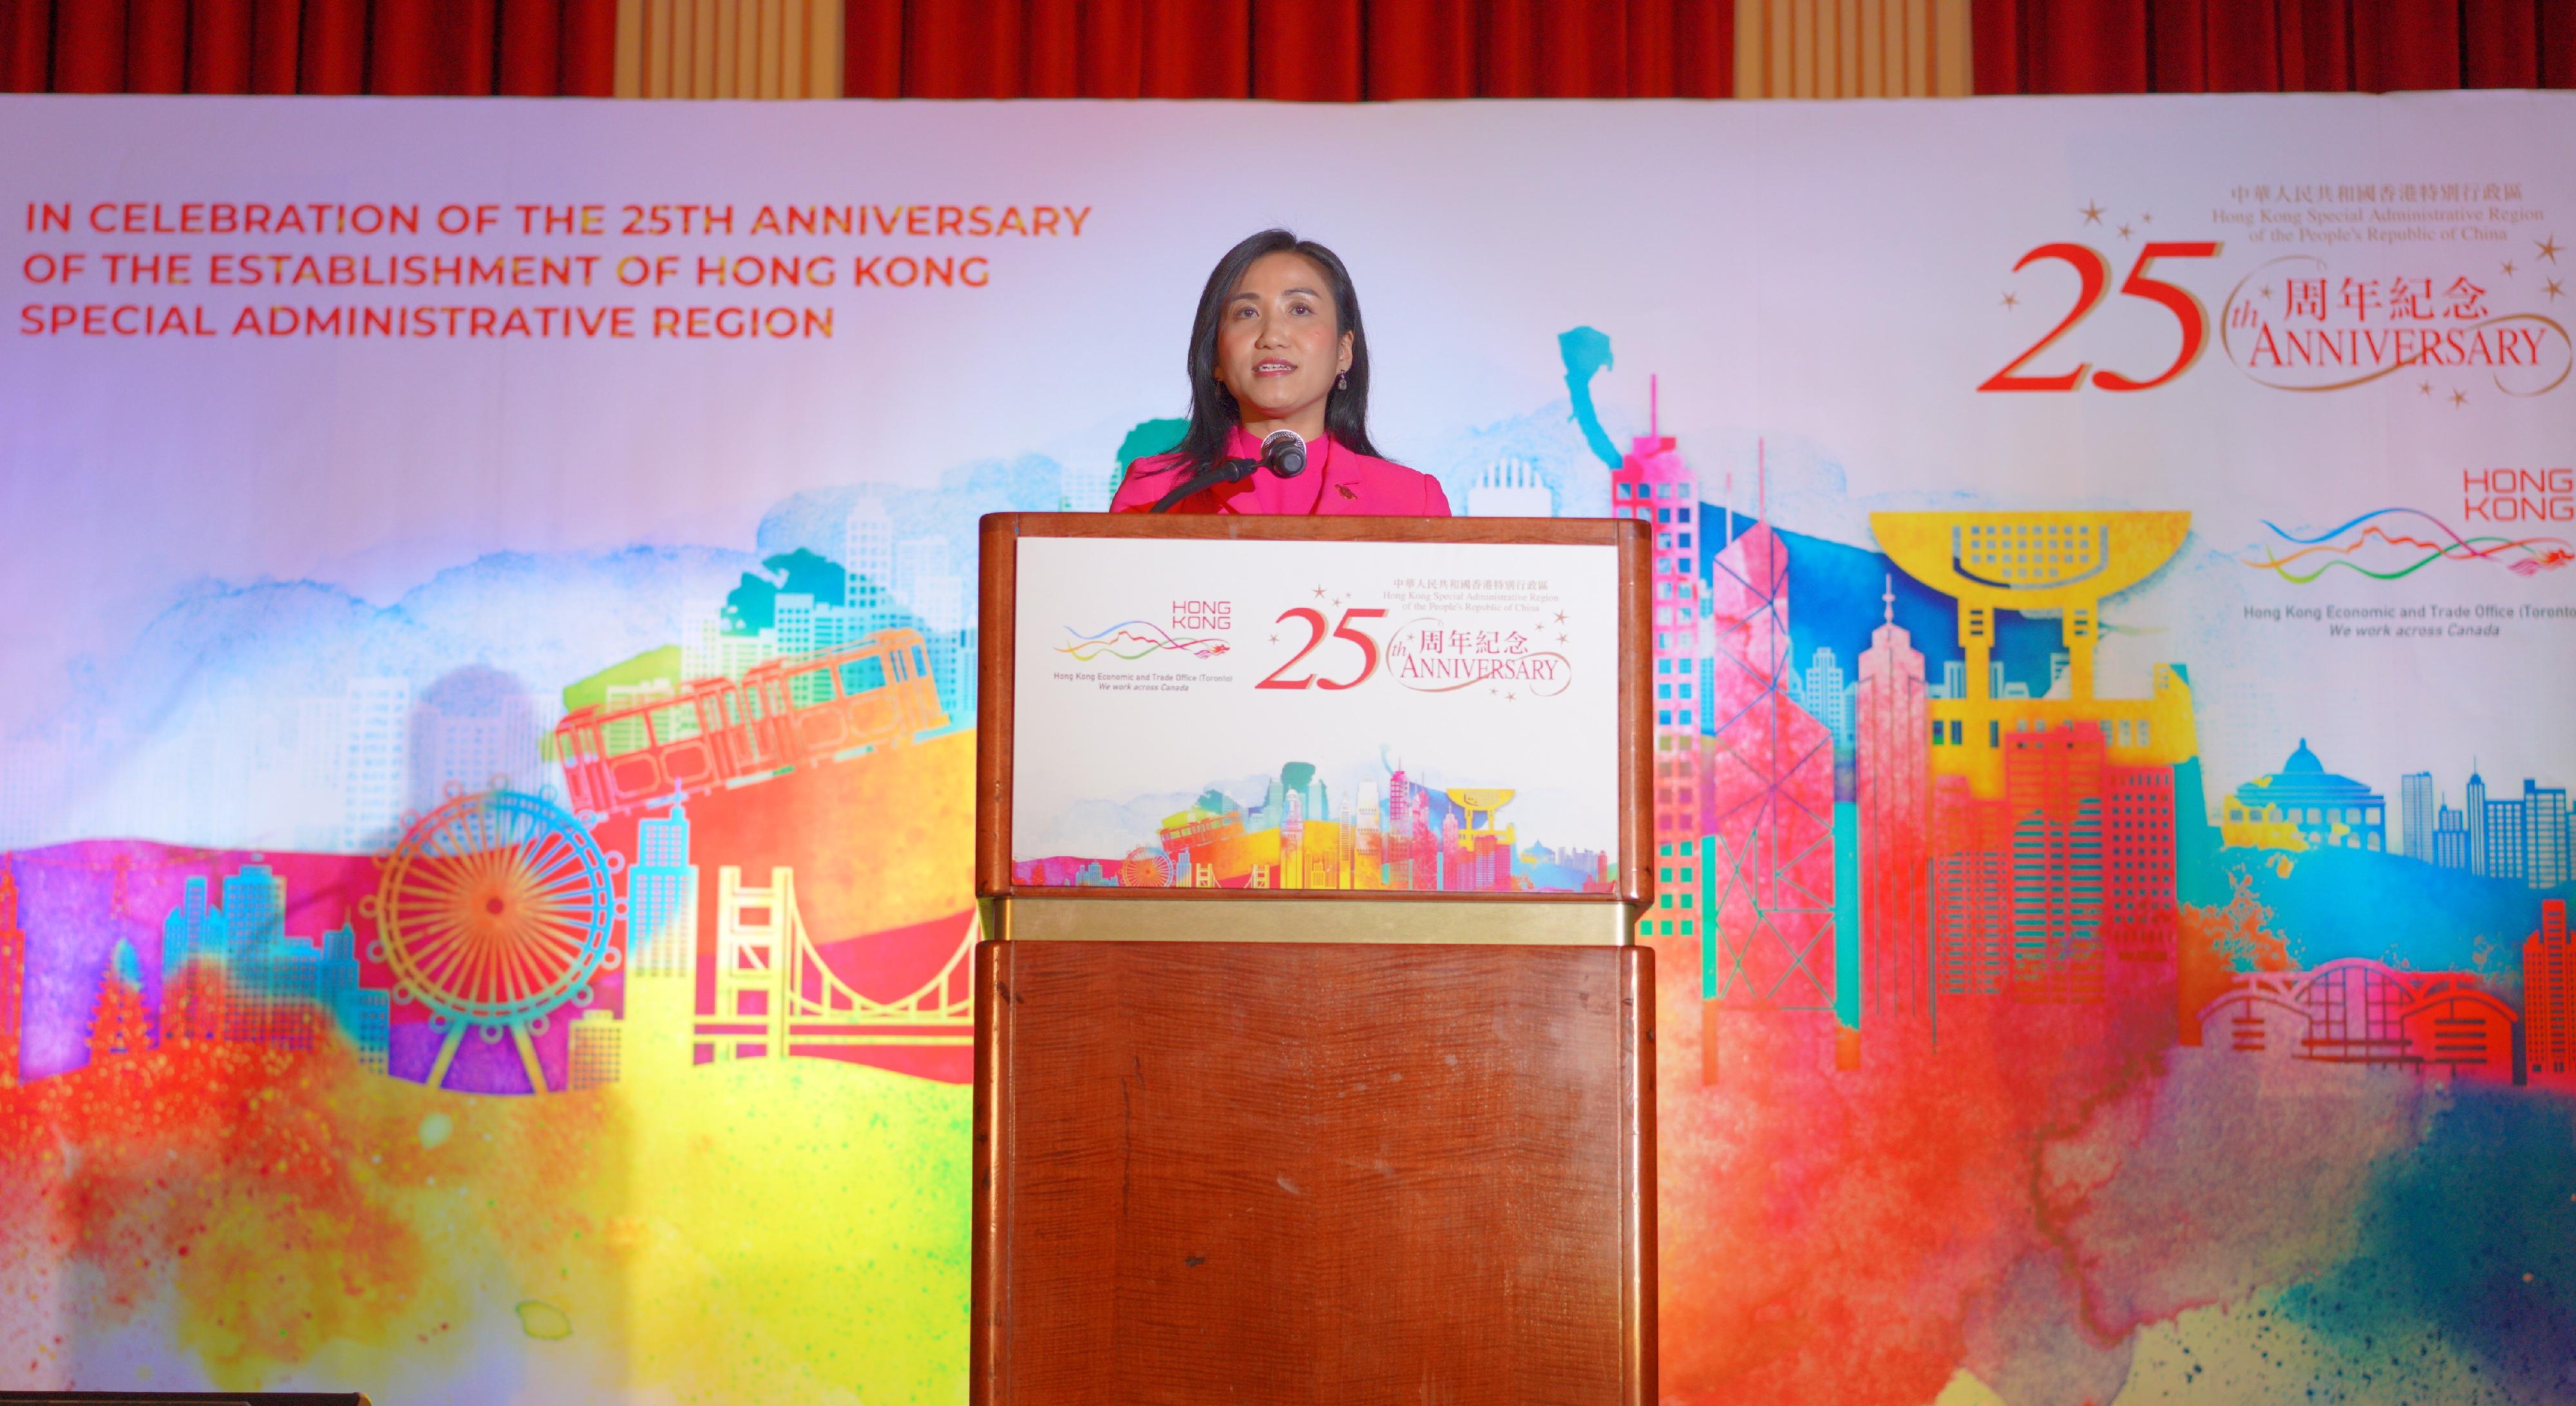 The Director of the Hong Kong Economic and Trade Office (Toronto), Ms Emily Mo, delivers the welcome remarks at the official gala dinner in celebration of the 25th anniversary of the establishment of the Hong Kong Special Administrative Region in Vancouver, Canada, yesterday (June 23, Vancouver time).